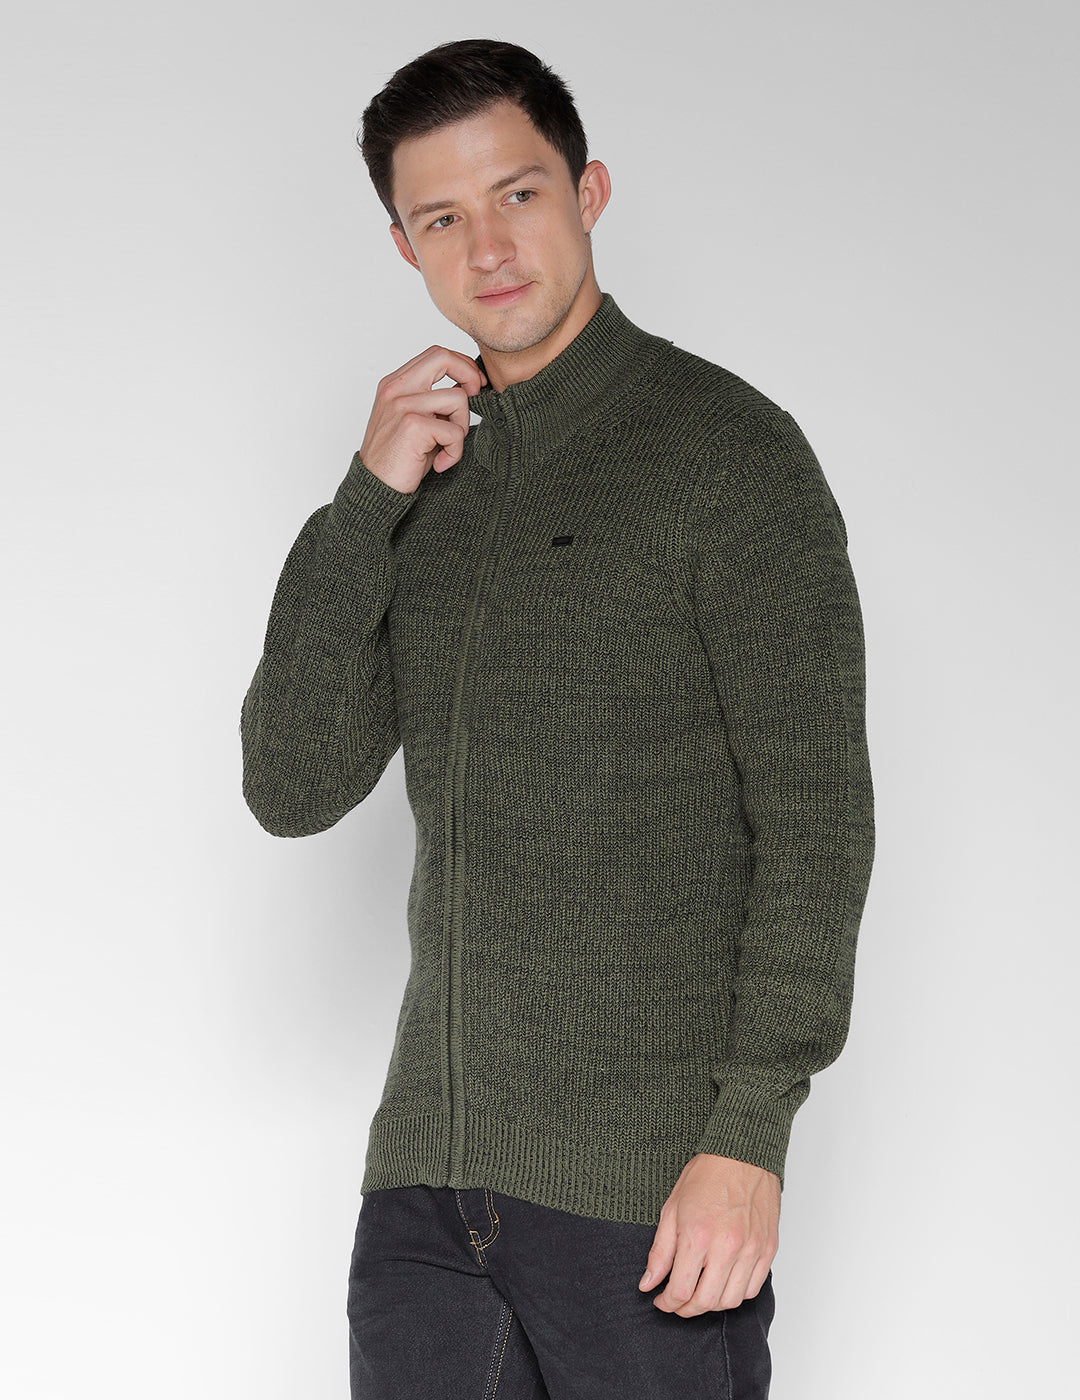 Identiti Full Sleeve Solid Slim Fit Cotton Casual Pull Over